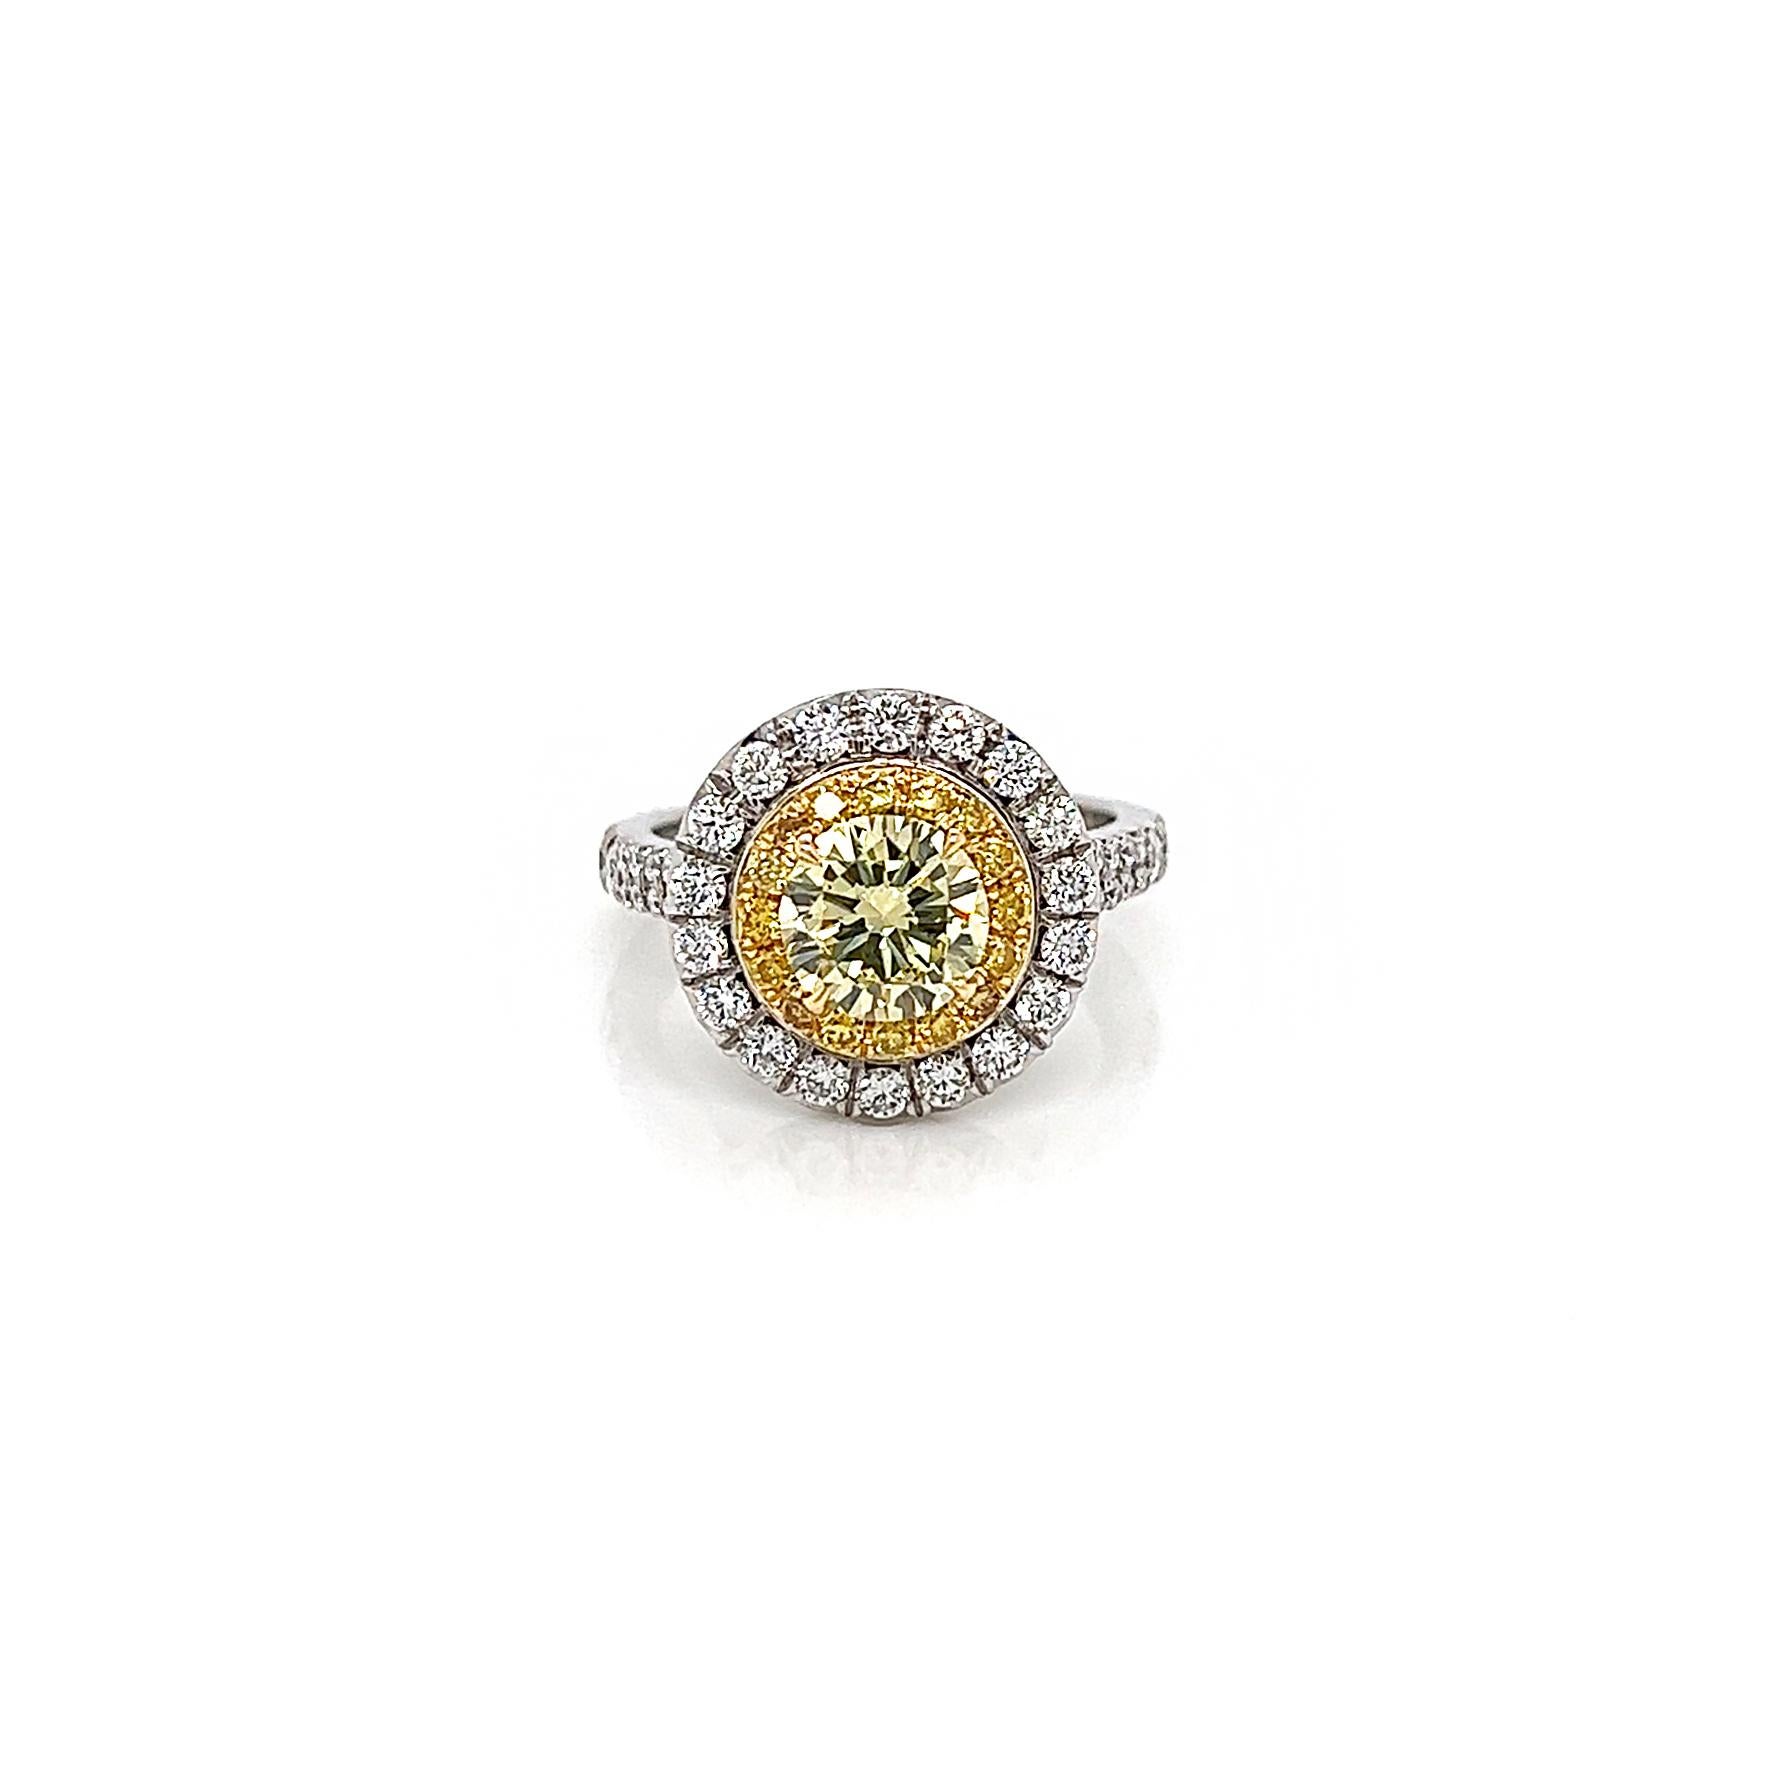 2.04 Total Carat Fancy Yellow Diamond Ladies Engagement Ring. GIA Certified.

This fancy yellow double halo ring is our most favorite 